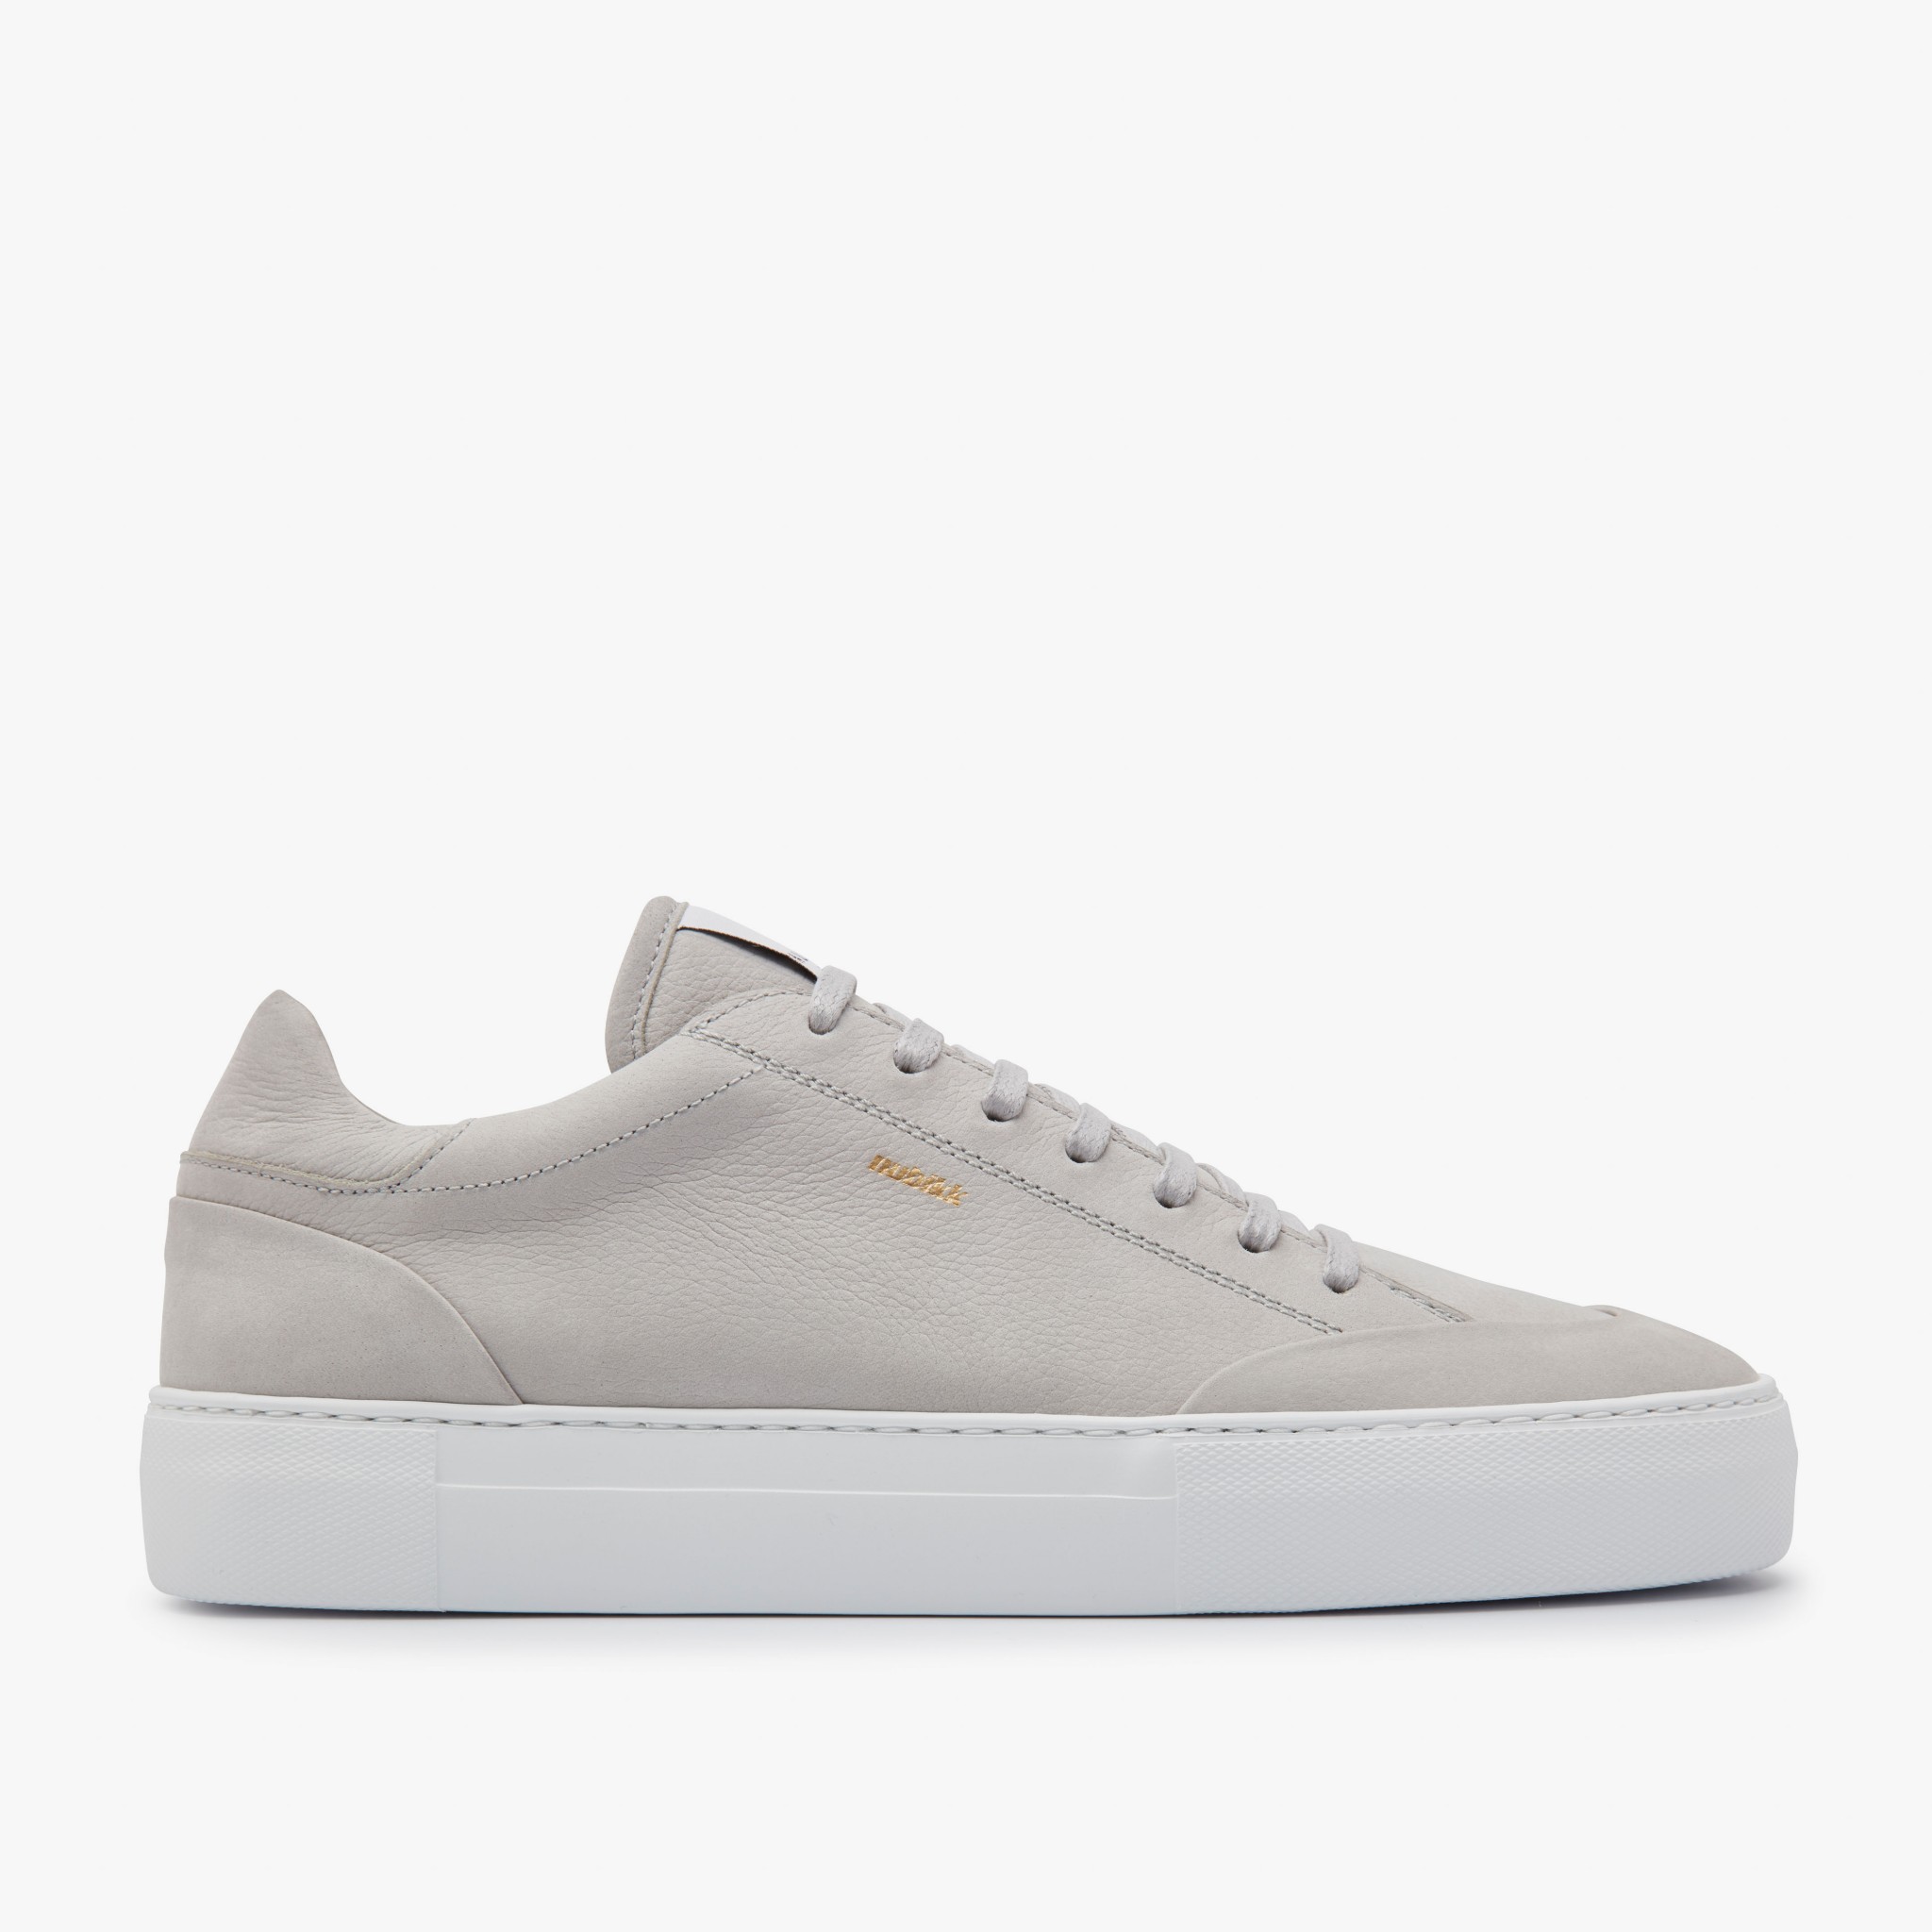 Trouva: White Leather Multicolor Jagger Naya Sneakers